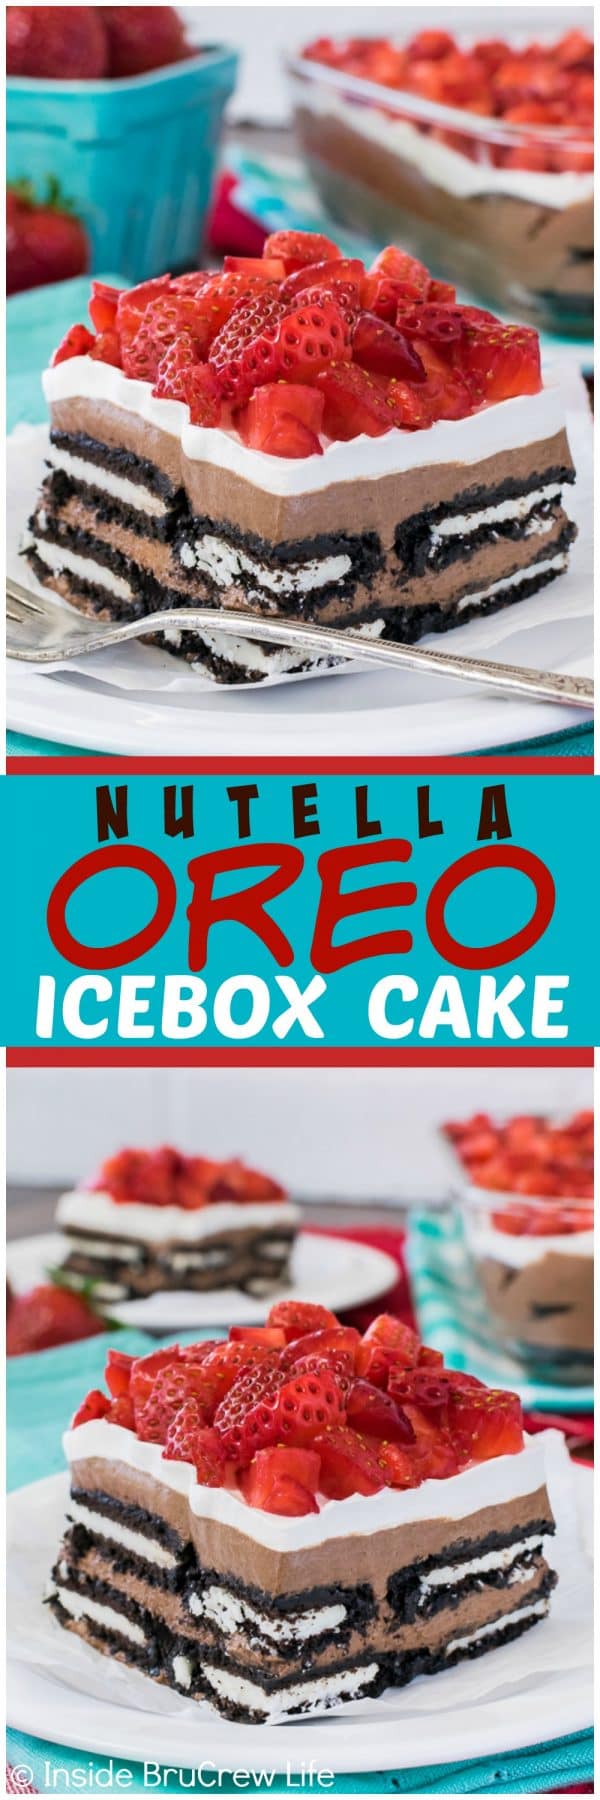 No Bake Nutella Oreo Icebox Cake - layers of Oreo cookies, chocolate cheesecake, and strawberries makes an easy and delicious treat. Great dessert recipe for summer!